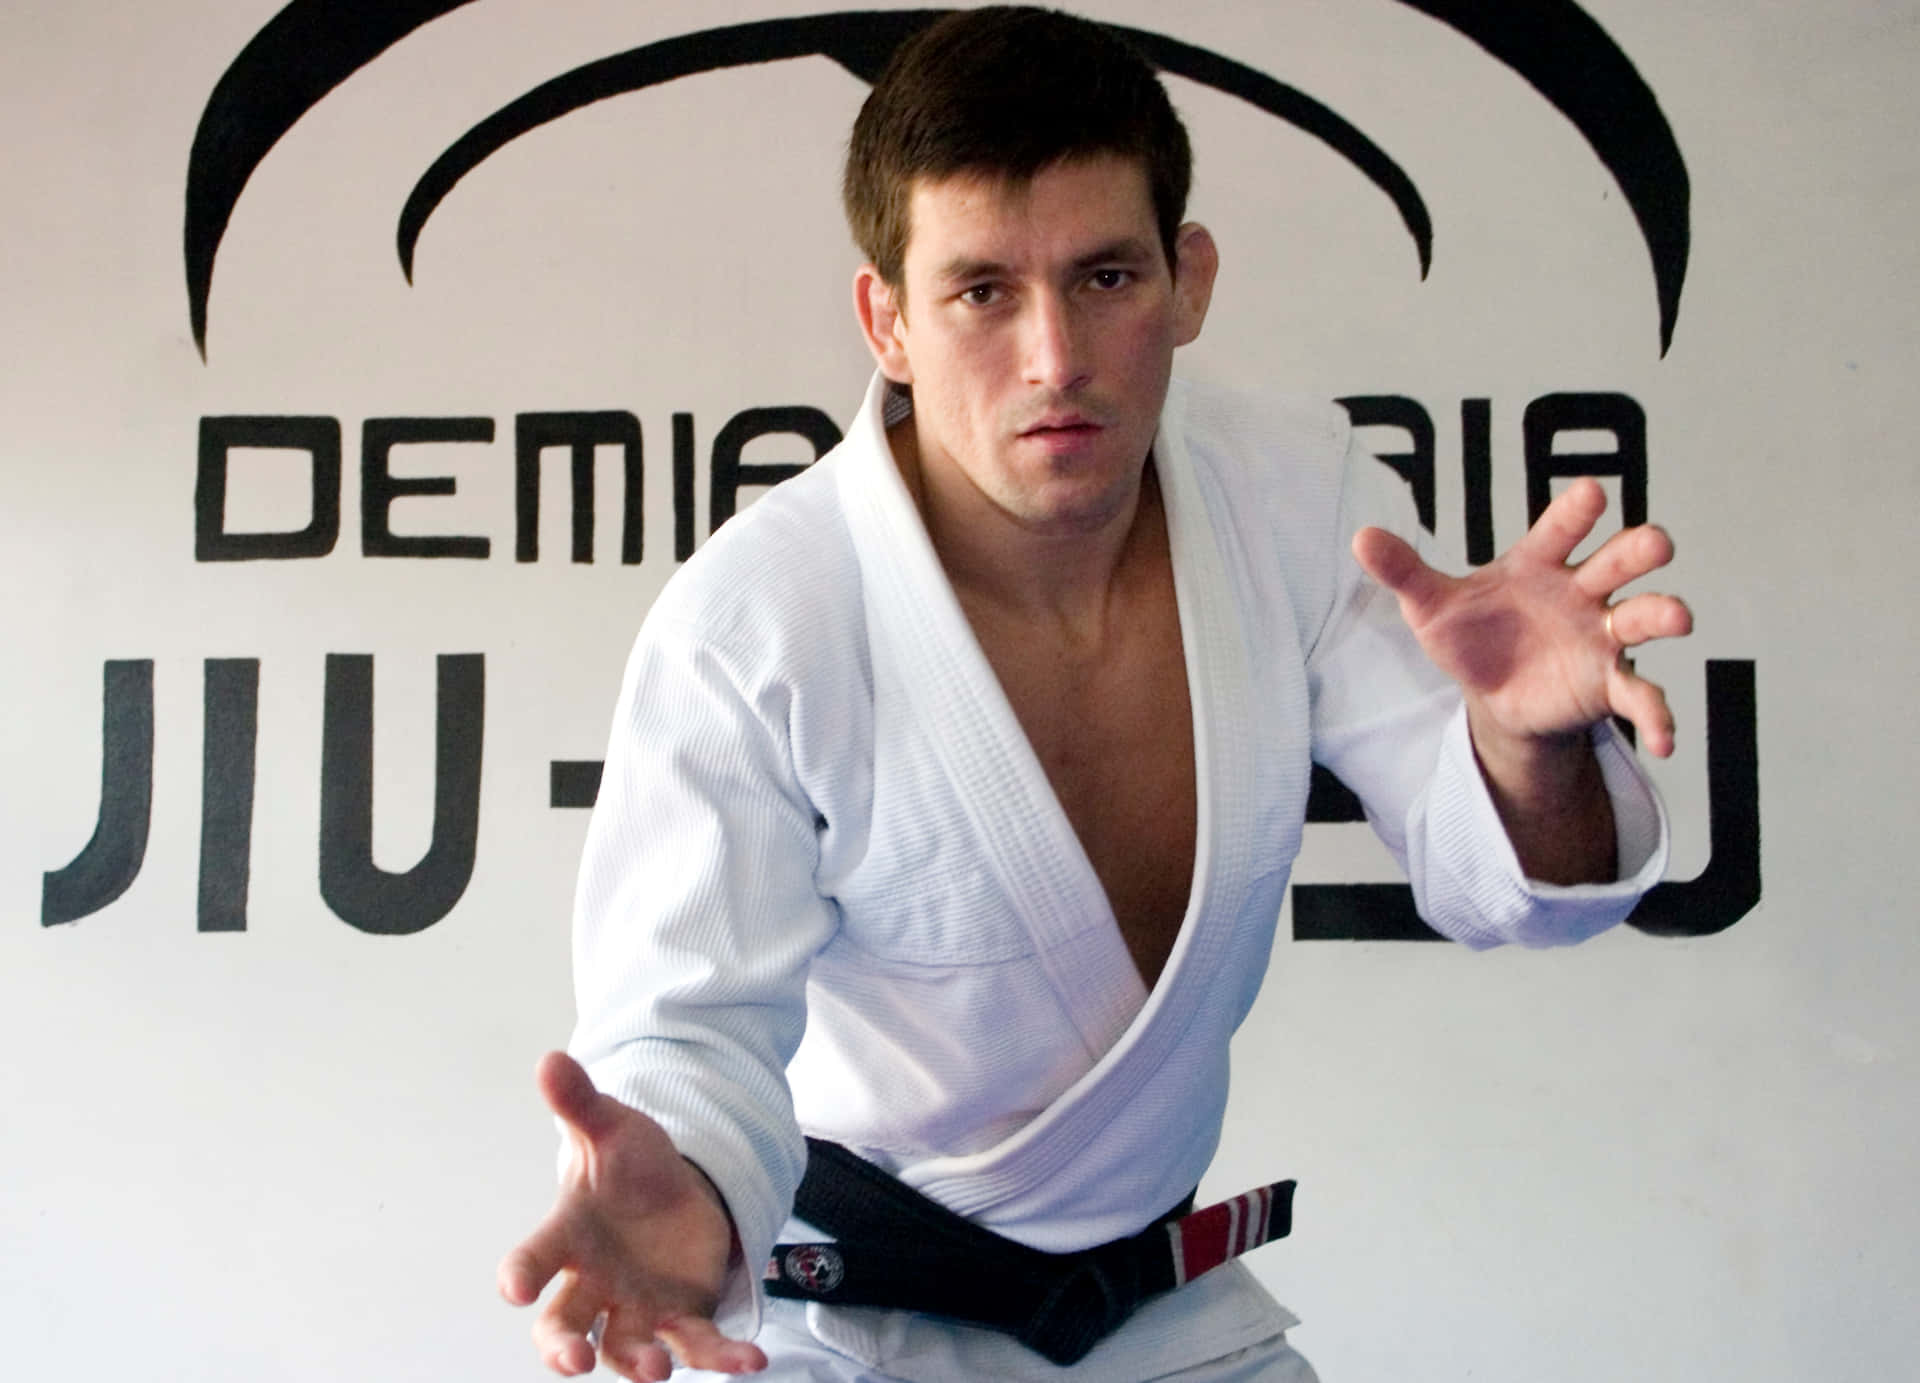 Mixed Martial Artist Demian Maia Background